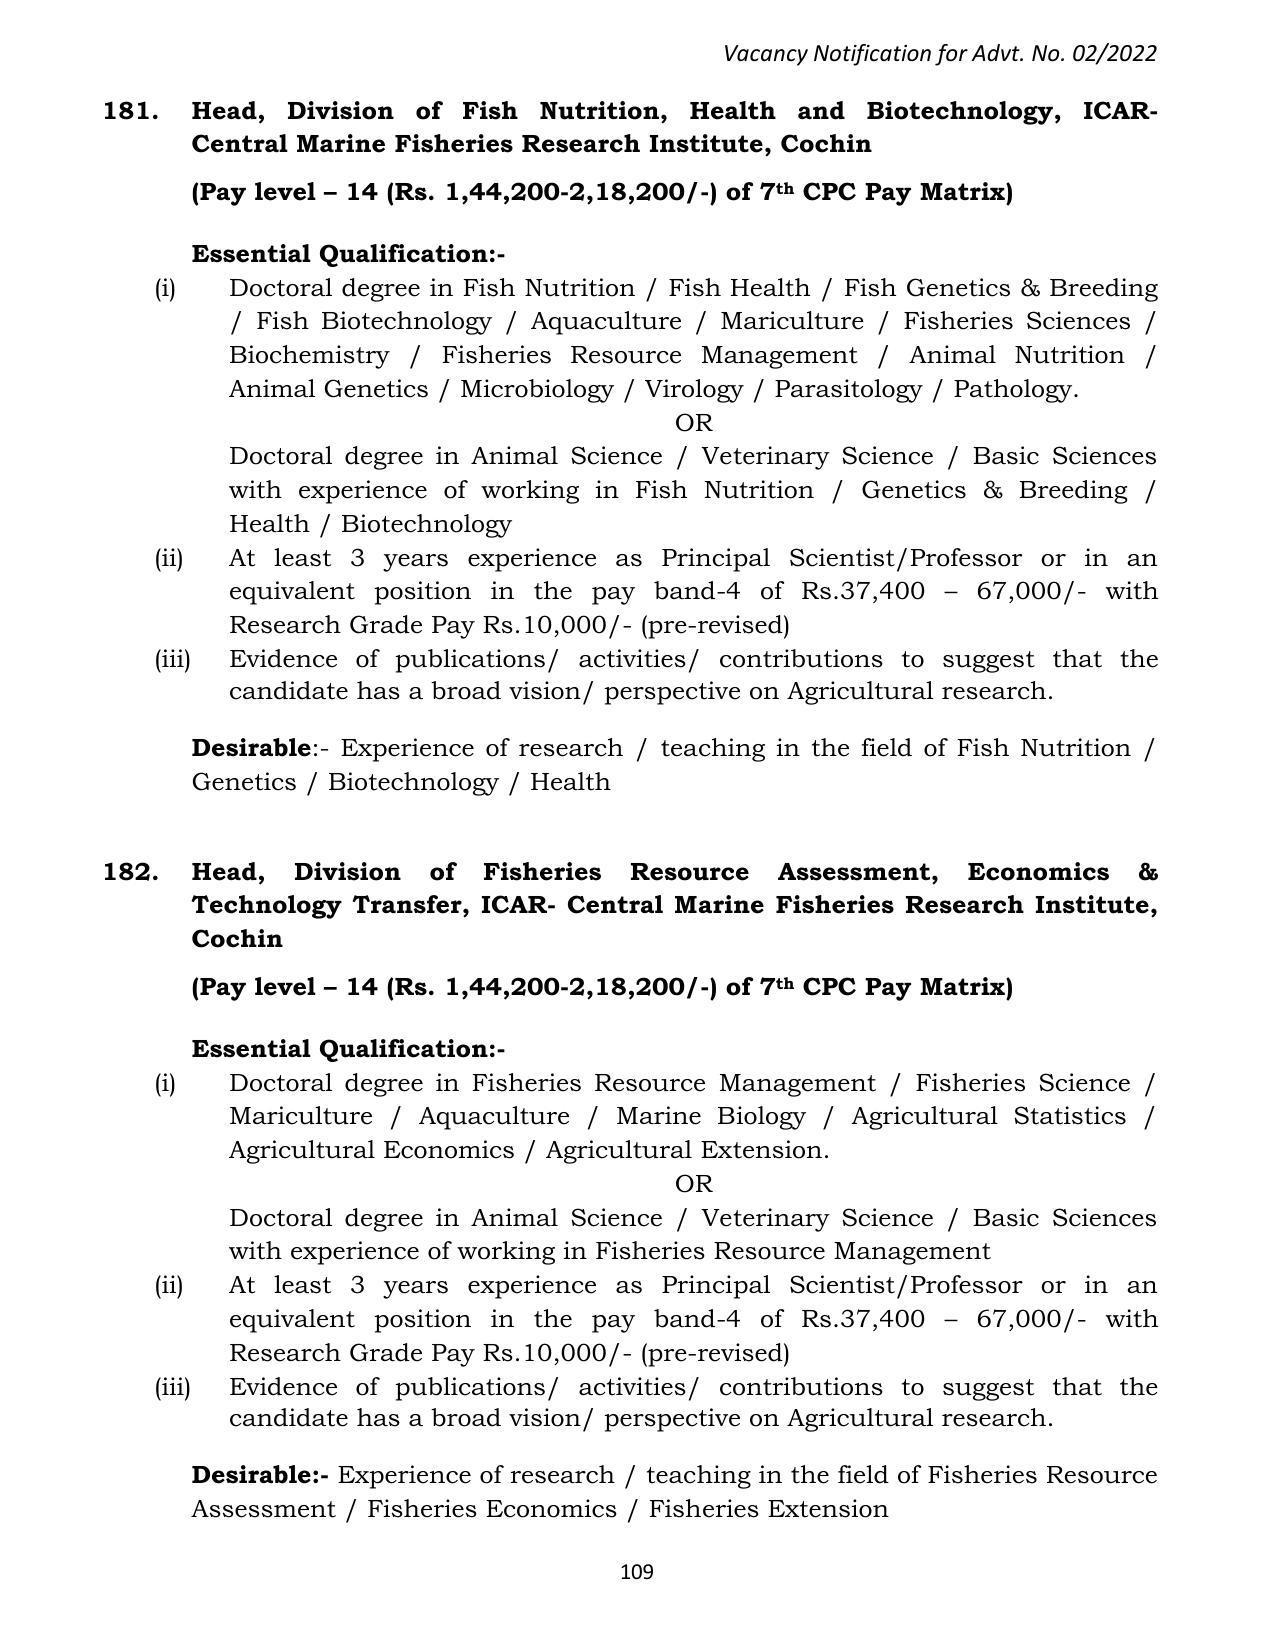 ASRB Non-Research Management Recruitment 2022 - Page 32